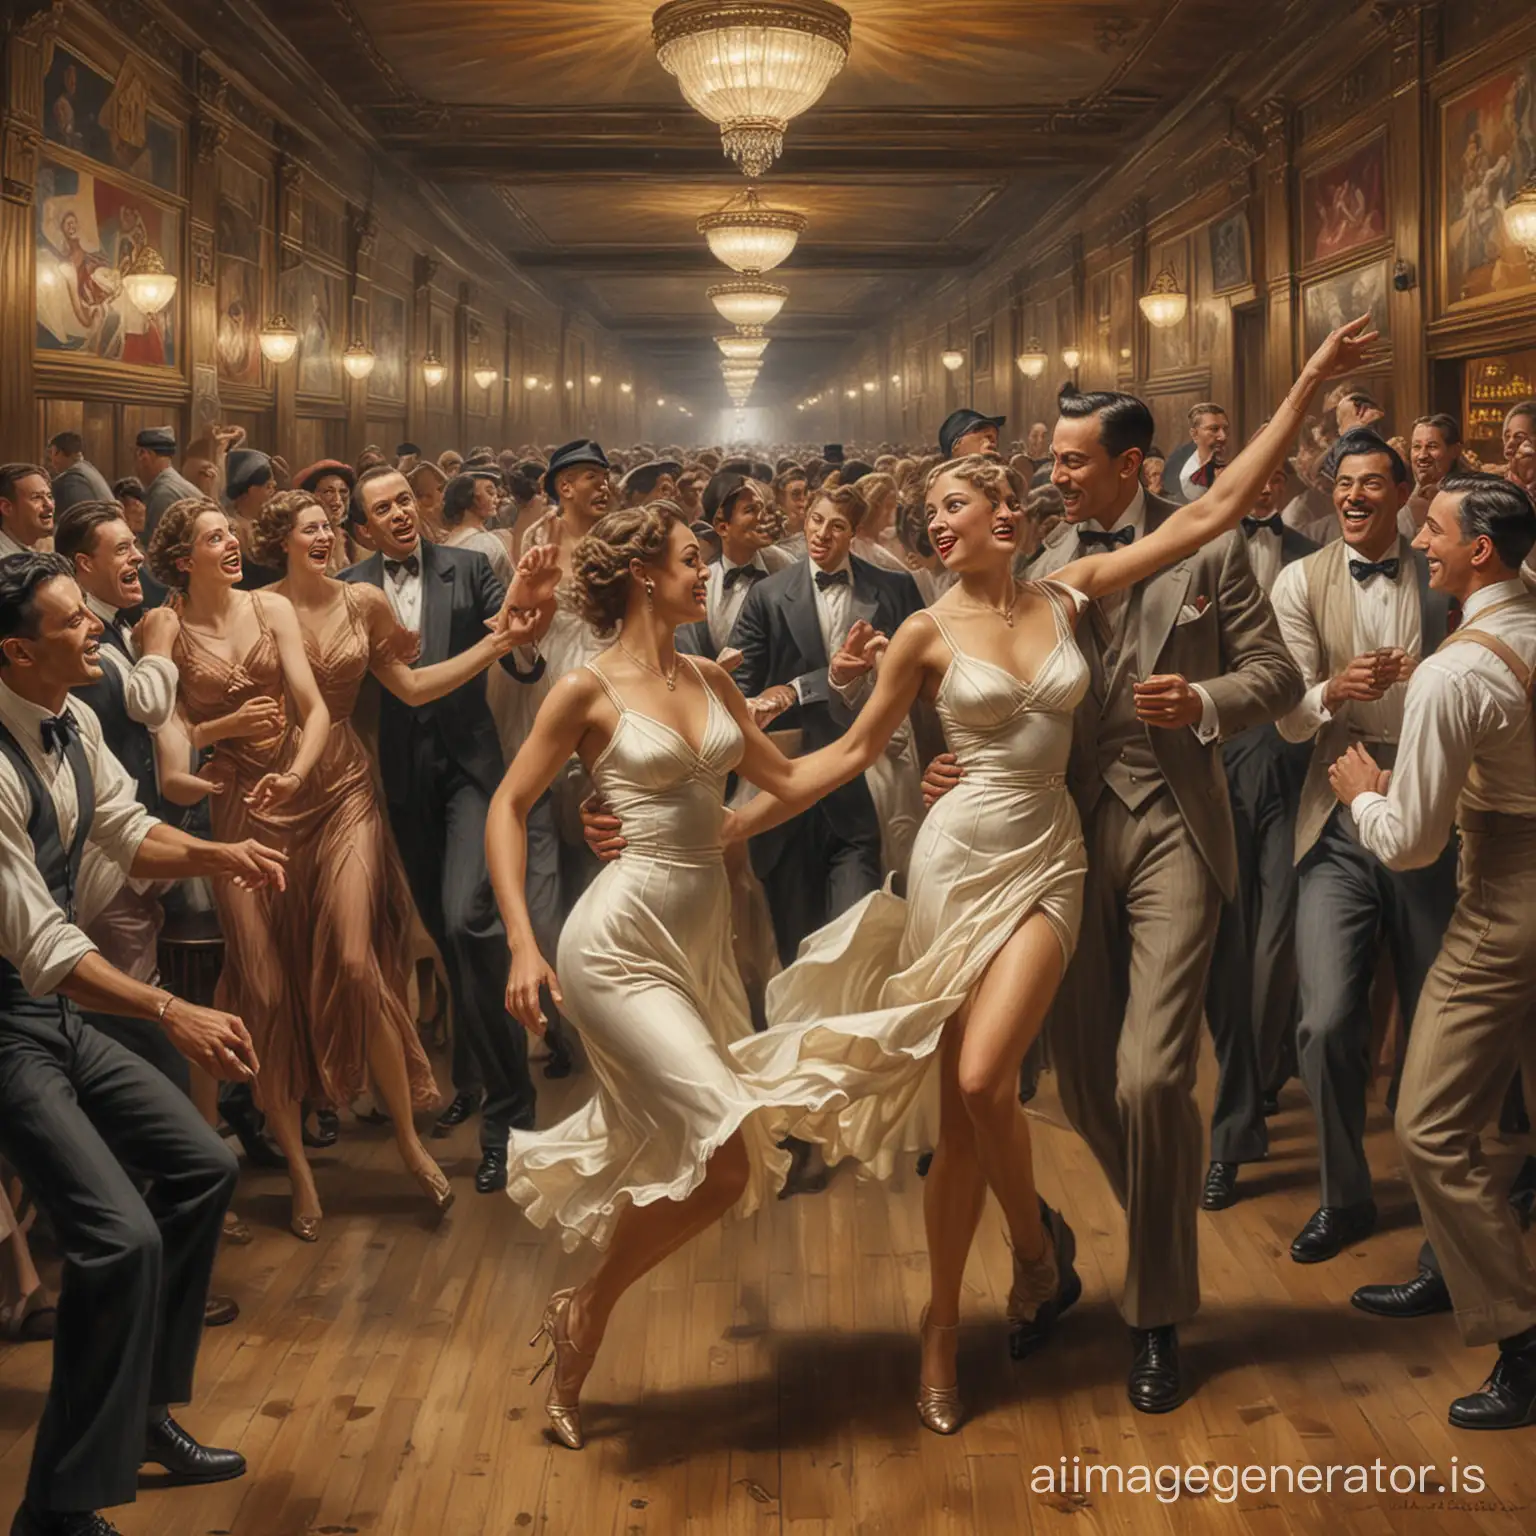 Imagine a bustling 1930s New York City dance hall, vibrant and teeming with life, through the eyes of Reginald Marsh, an artist known for his depictions of urban life and its dynamic human tableau. The scene is alive with movement; couples whirl across the dance floor, their forms blending into a symphony of motion. The air is charged with energy, the sounds of jazz and laughter melding into a rich tapestry of urban existence....